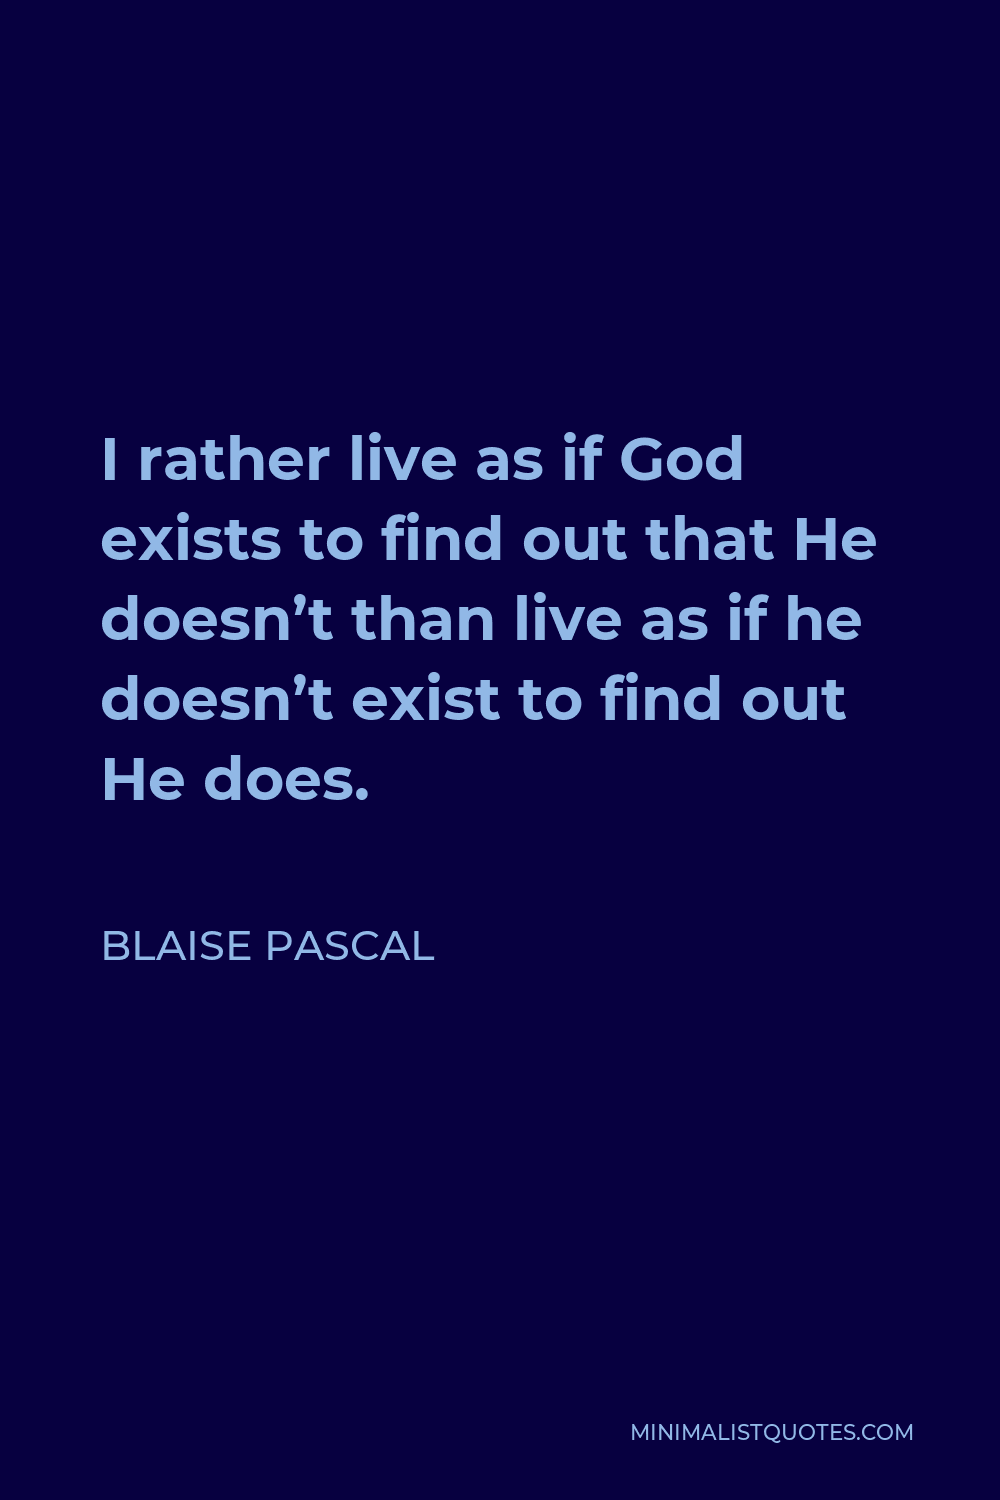 Blaise Pascal Quote - I rather live as if God exists to find out that He doesn’t than live as if he doesn’t exist to find out He does.